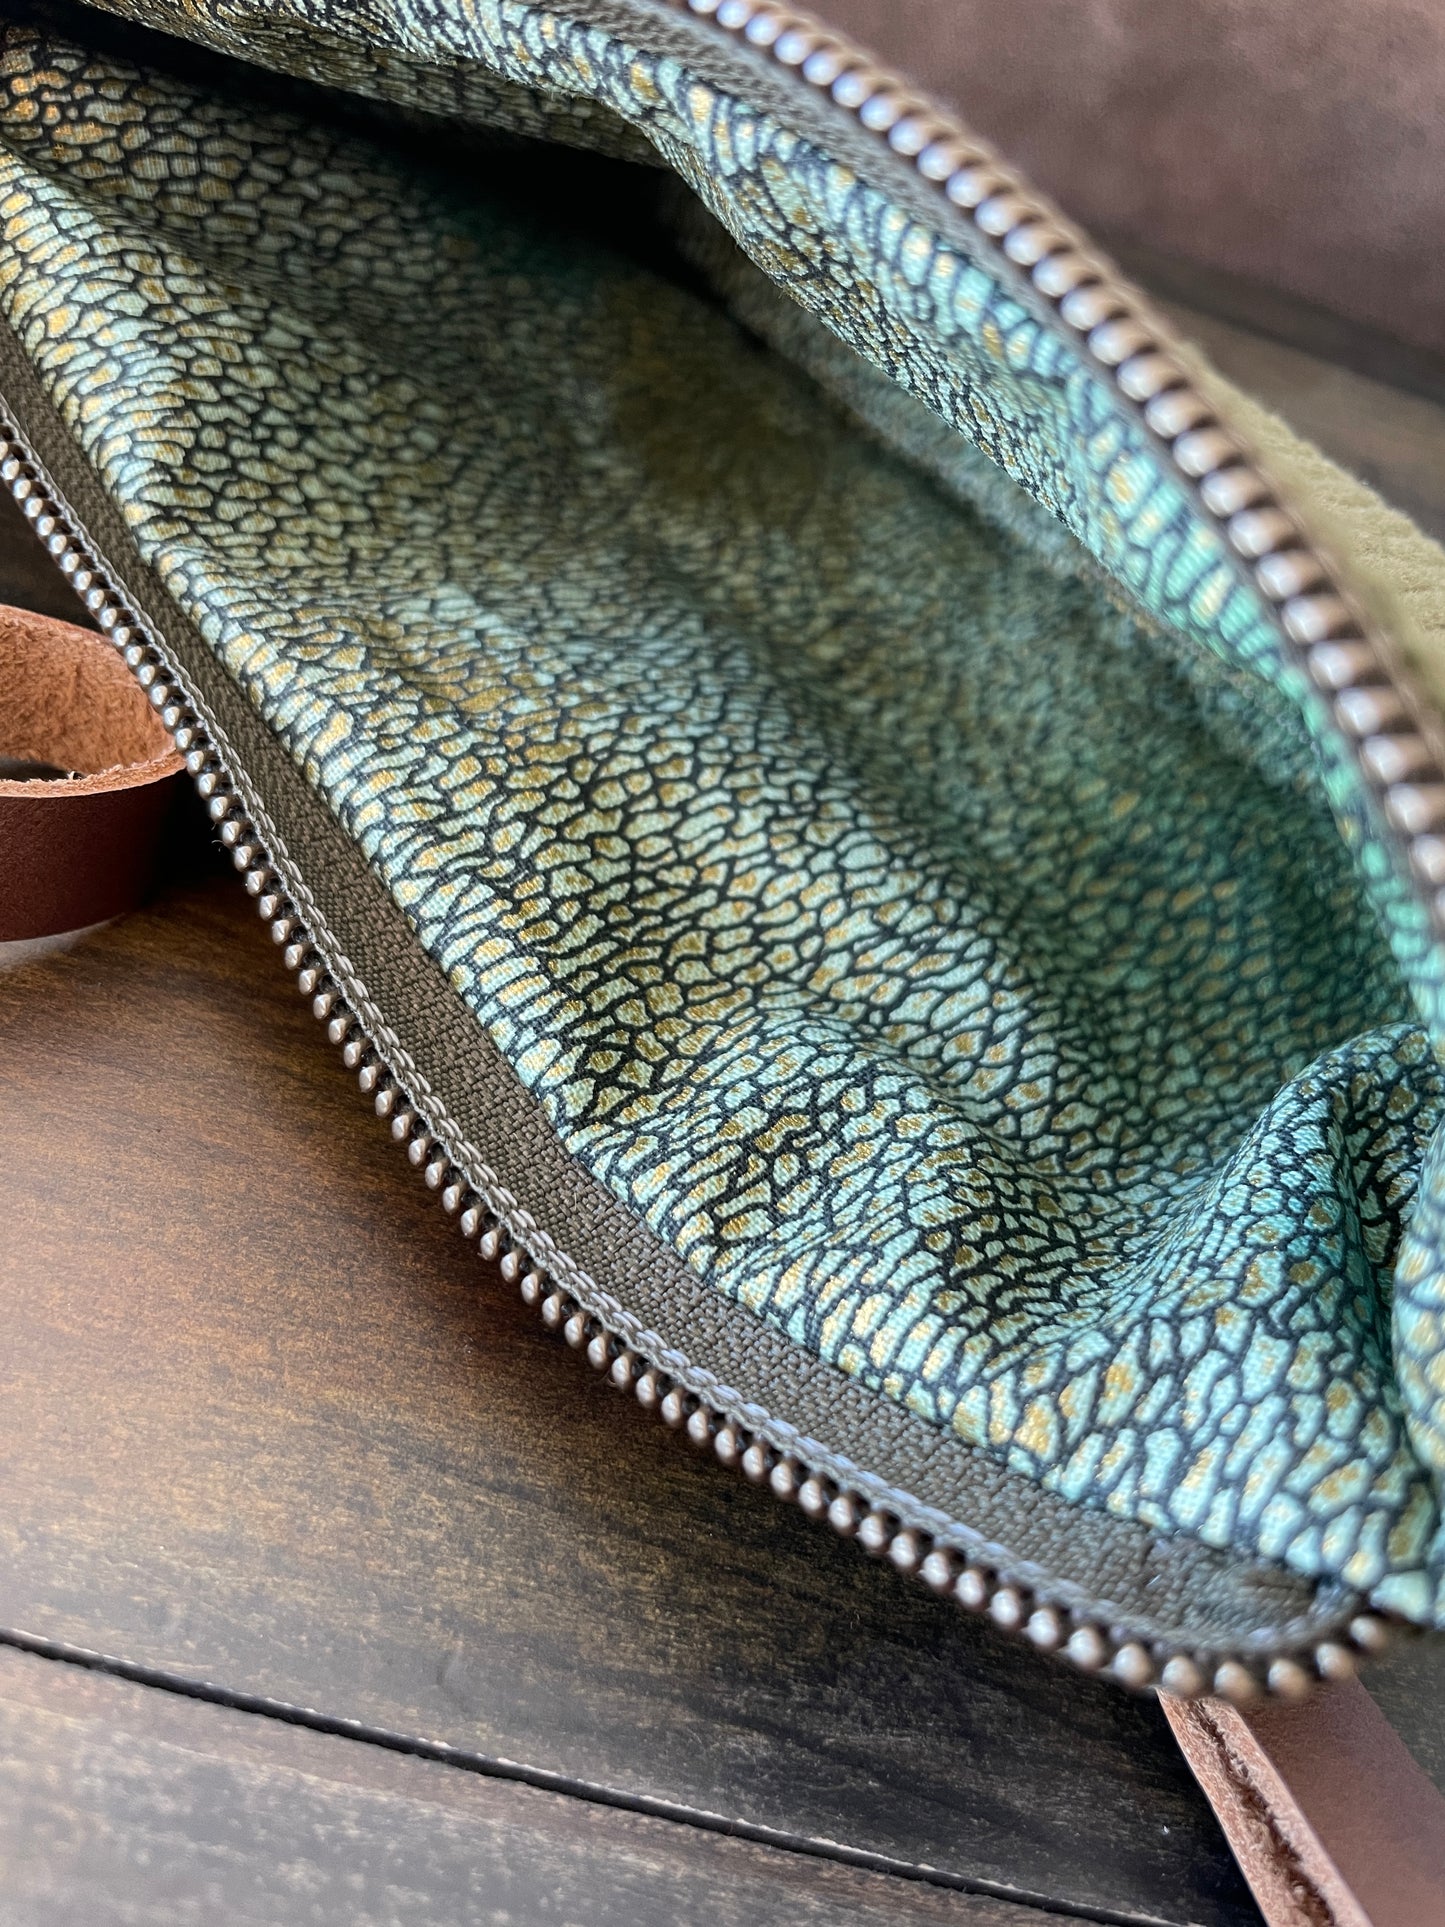 Zippered Pouches